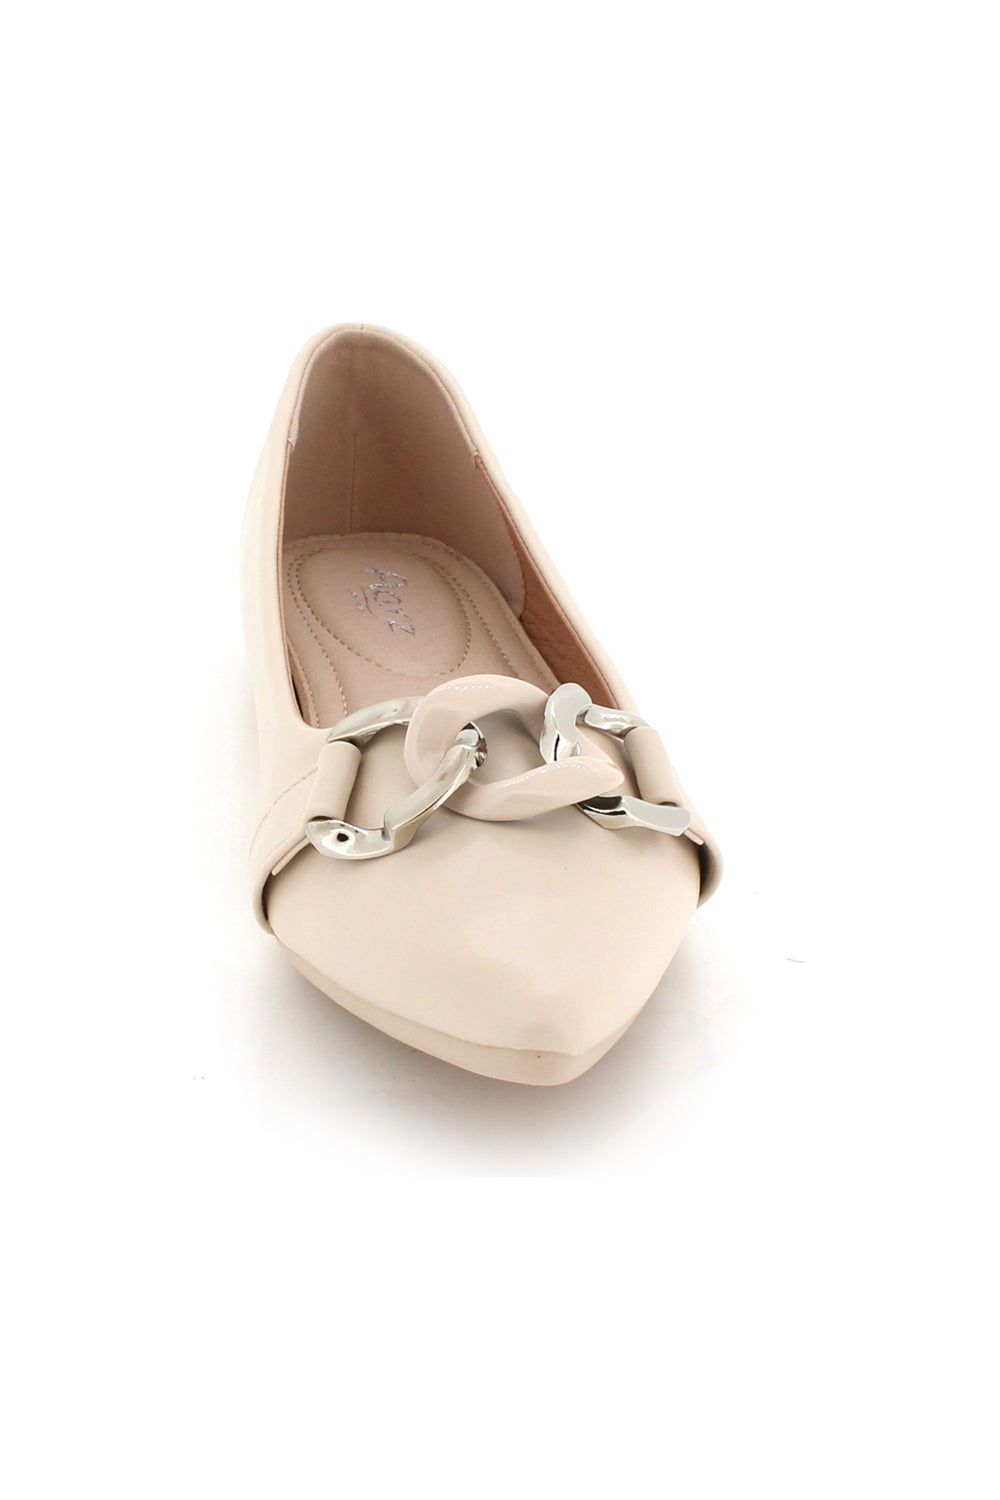 Everyday Ballerinas Essential Padded Sole Comfort Casual Pump Slip-On Pointed Toe Ballet L8008